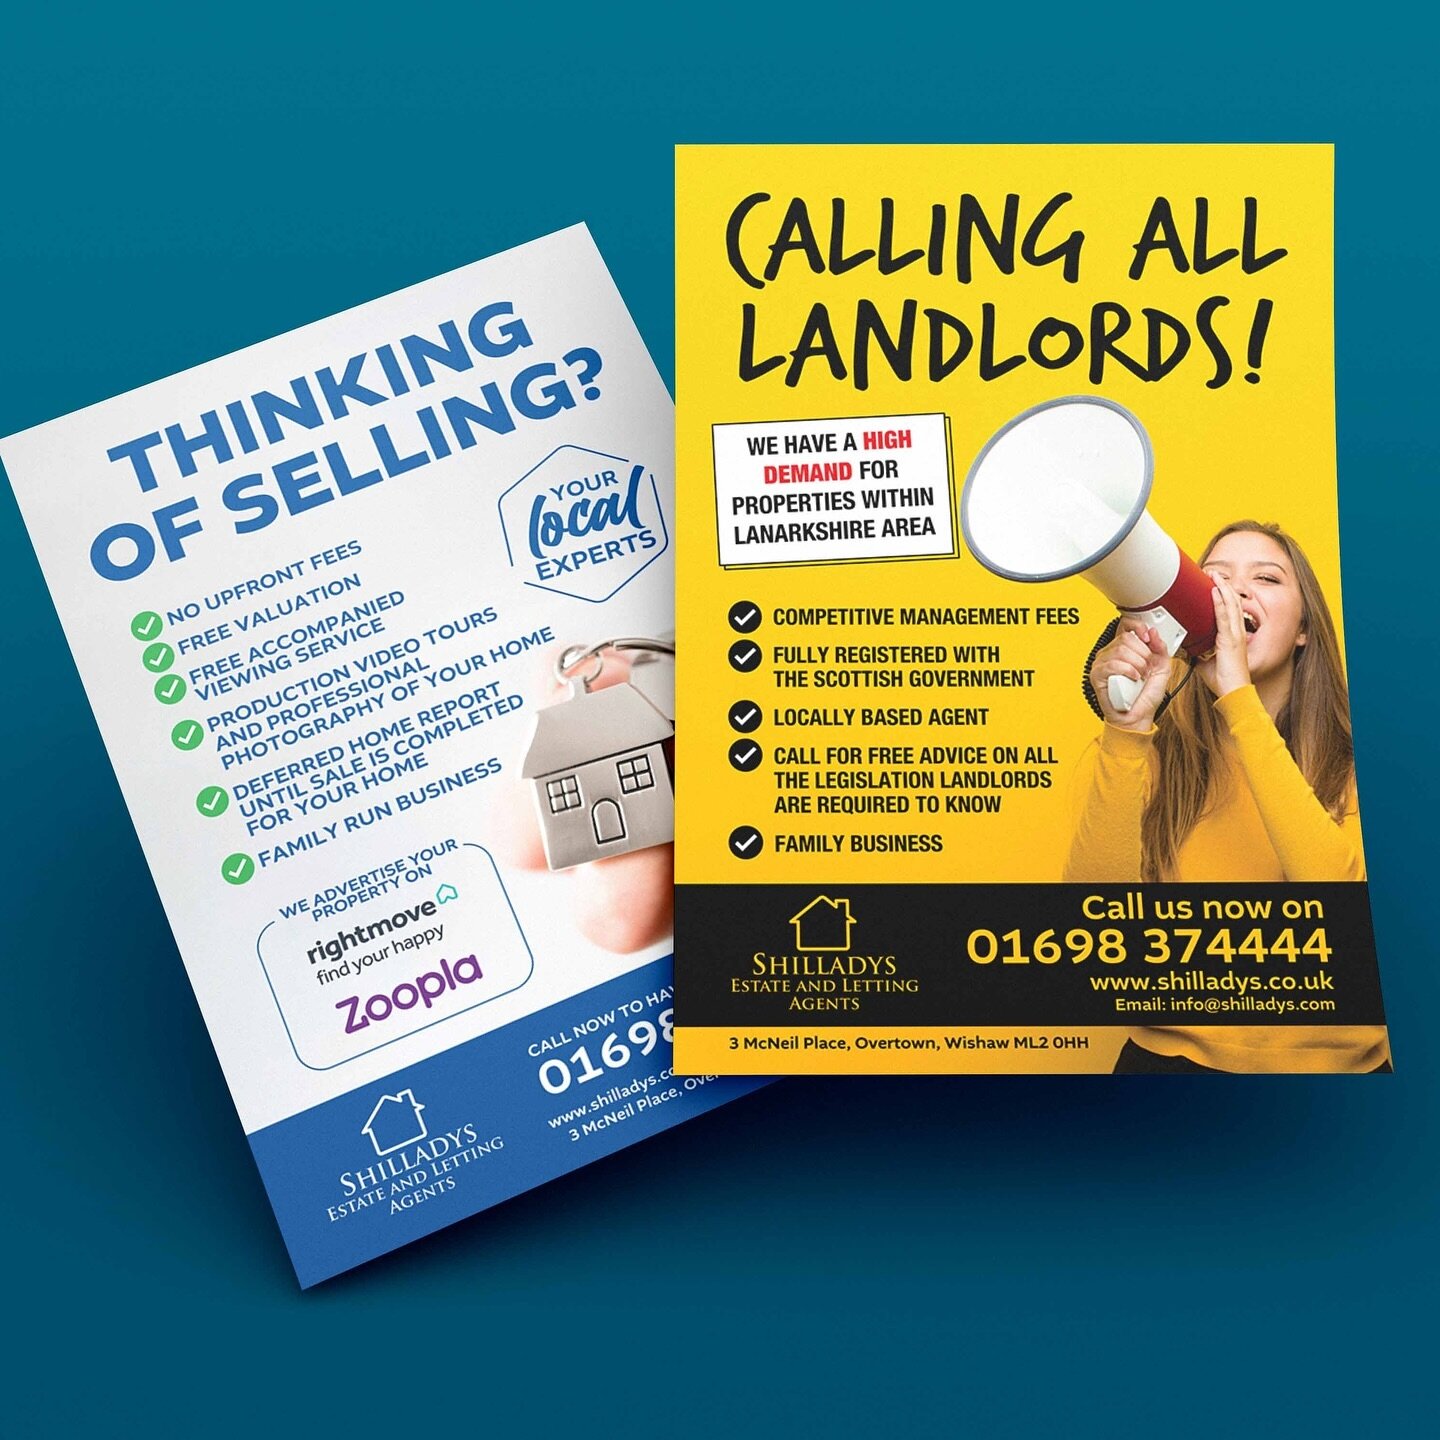 🏠 New flyer design for Shilladays.co.uk in Wishaw, UK.

We created these designs to catch the eye of both landlords and those interested selling their home. 

We also managed the print run and distribution of thousands of leaflets to homes in client